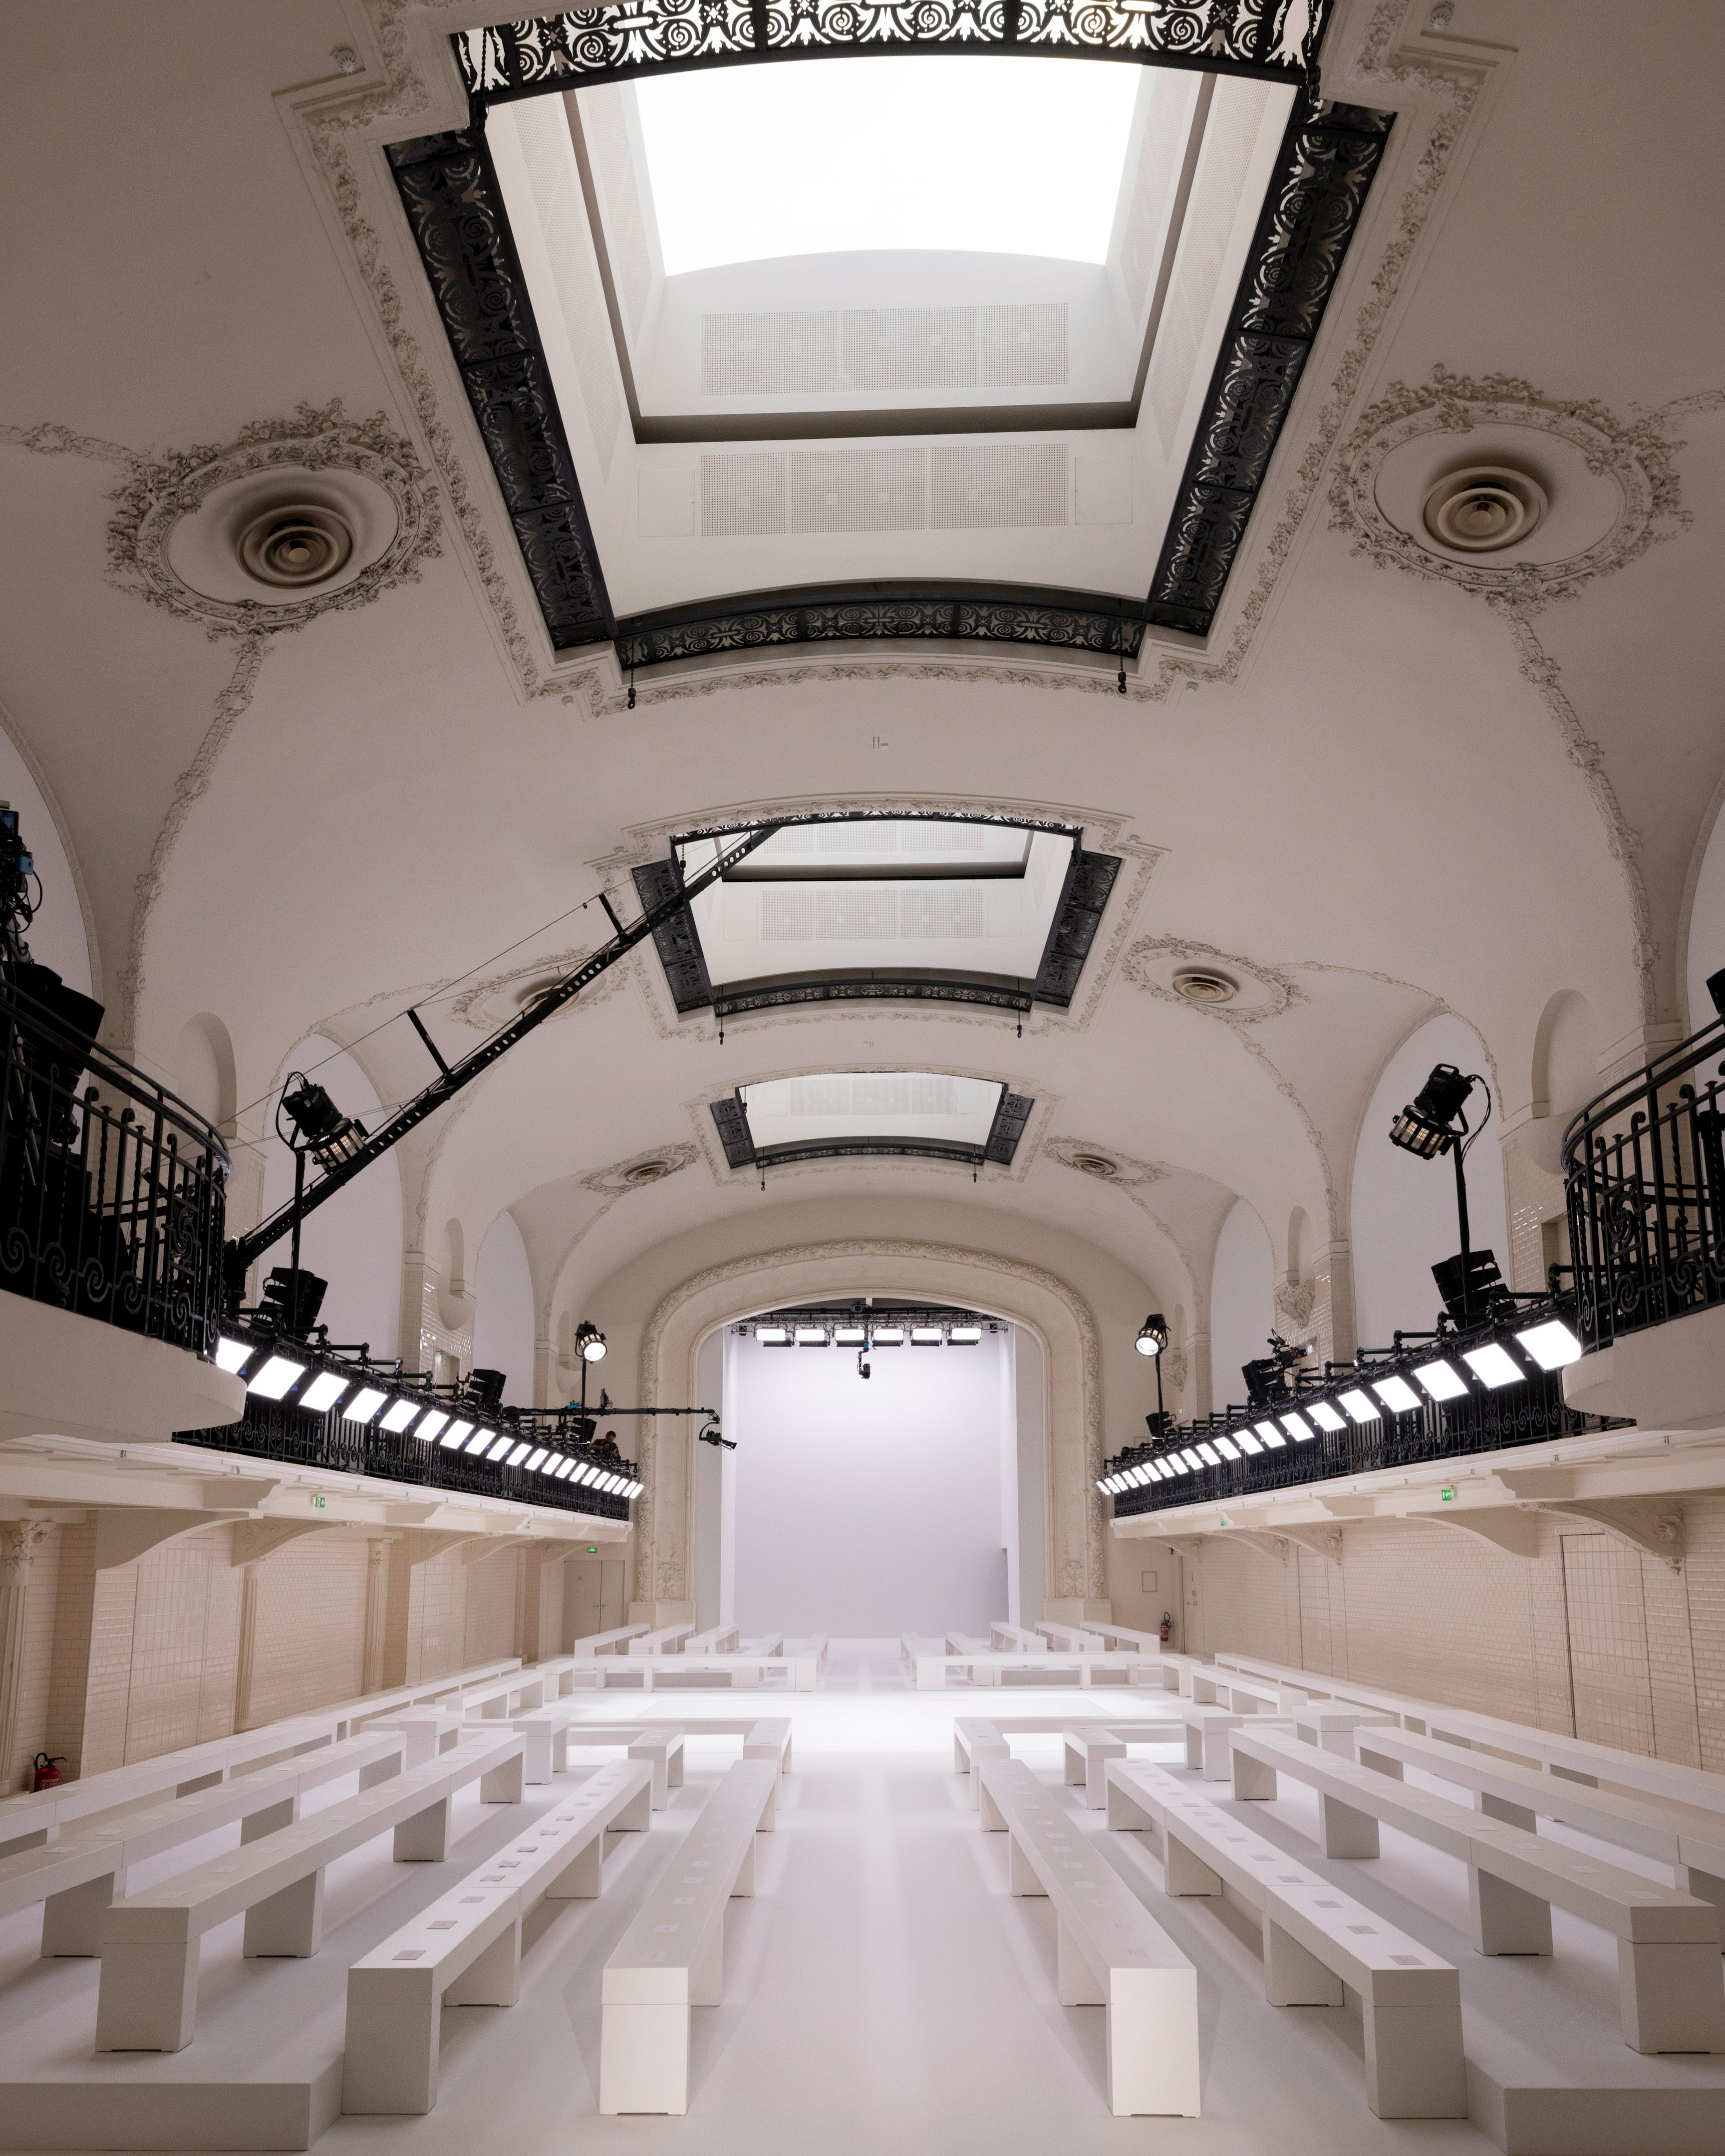 WATCH THE HAUTE COUTURE SHOW